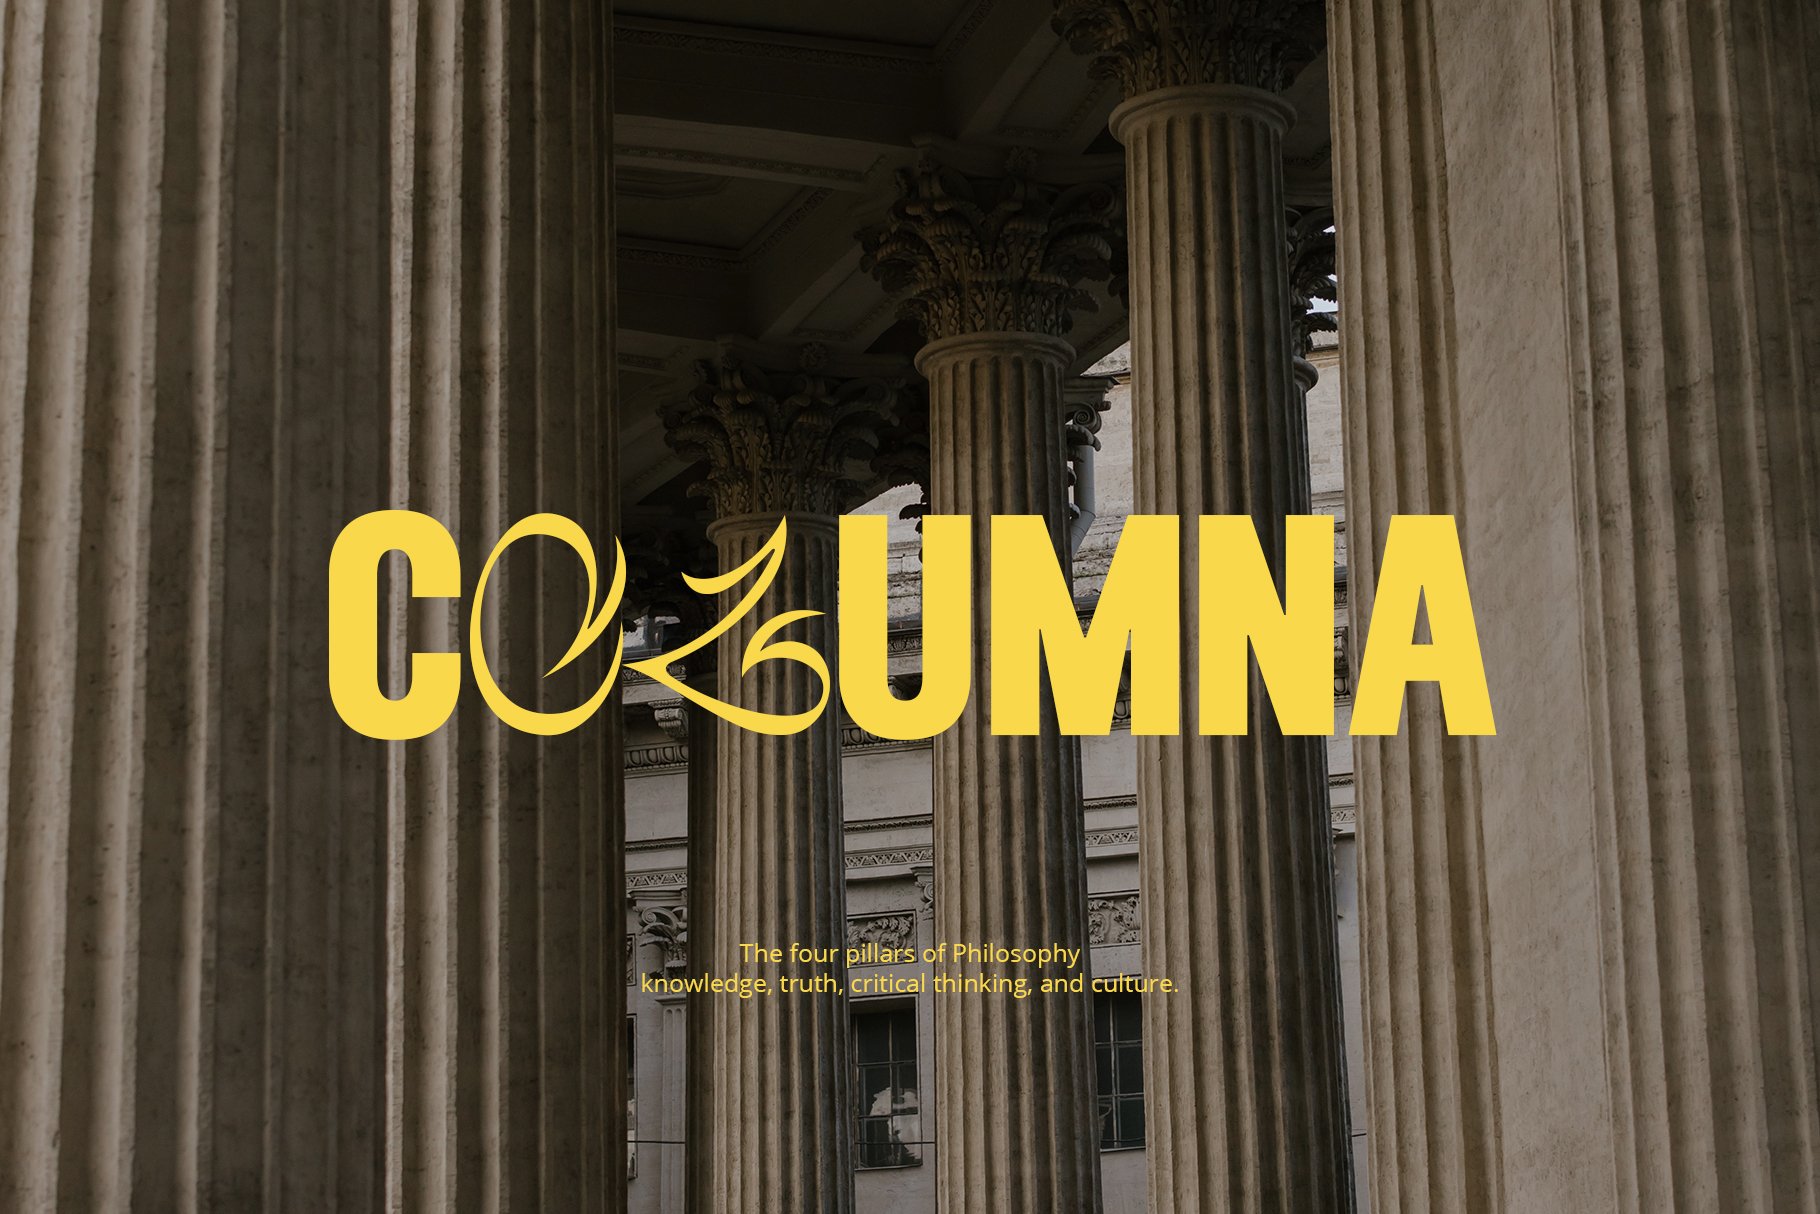 A photo of columns with the word'co'on them.